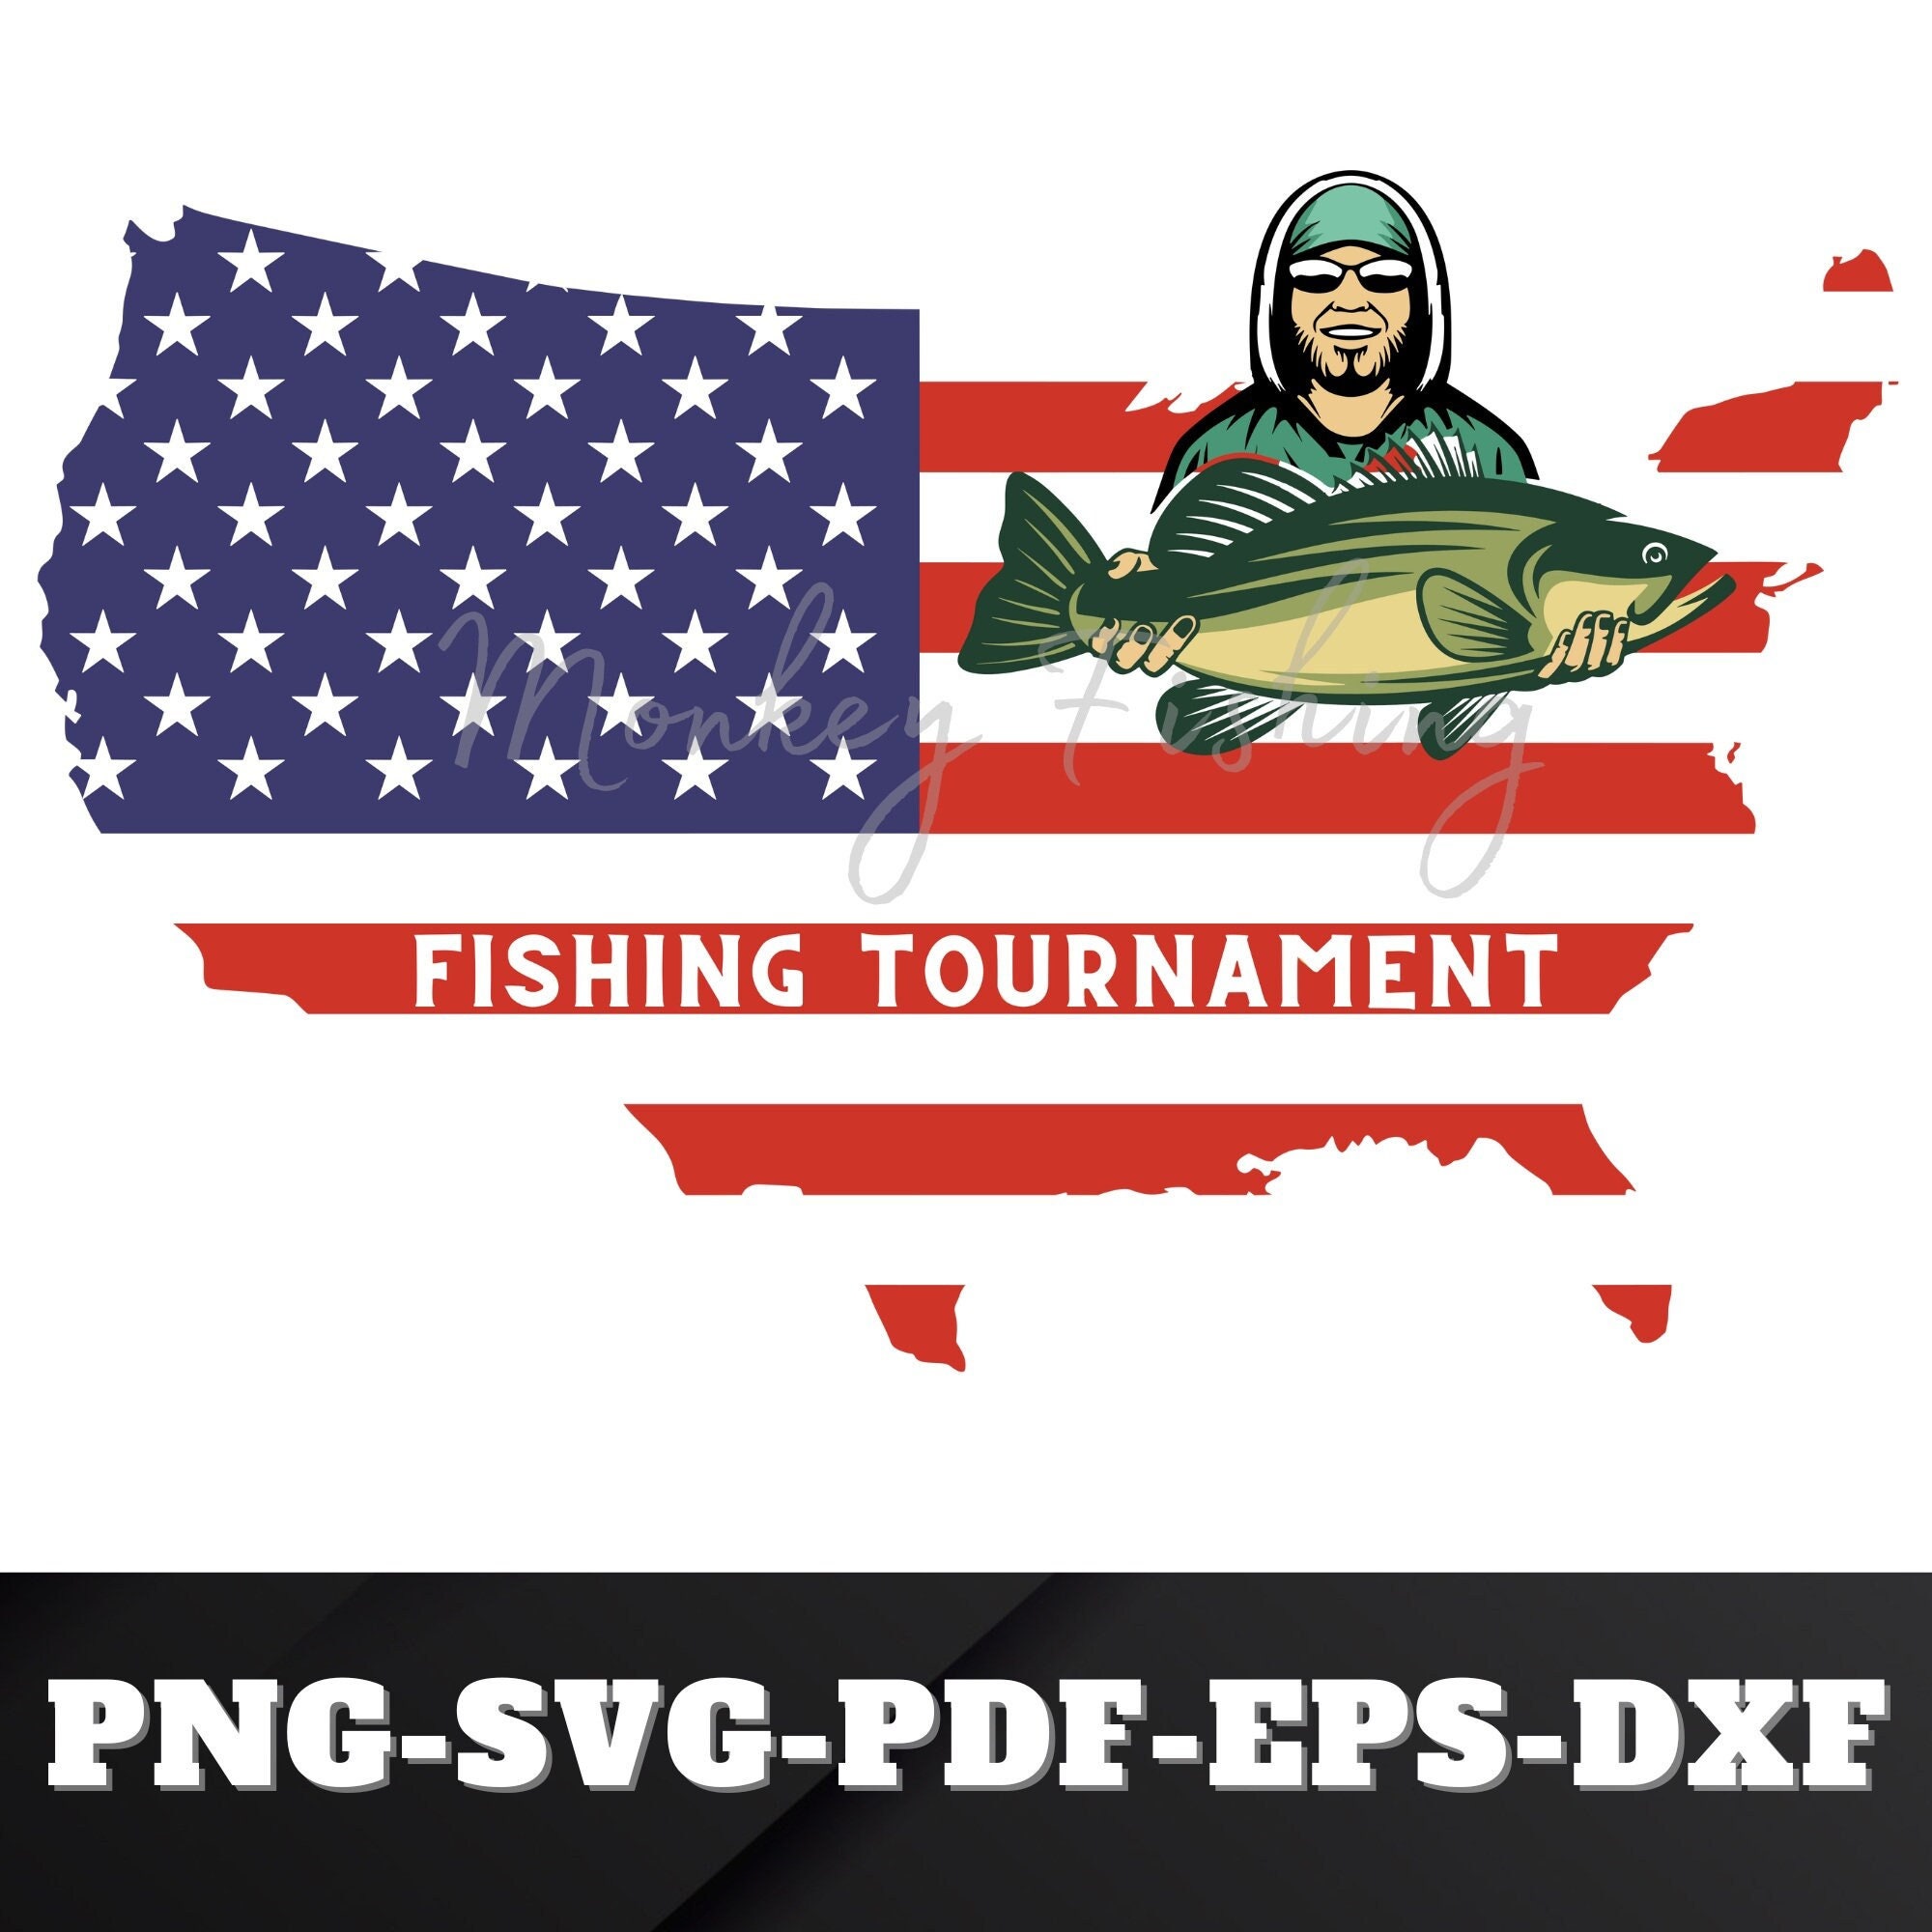 Black Bass Fishing U.S.A Clipart for Digital Download for Printing / T-shirt  / Caps / Decals / Stickers / Mugs / High Quality Fishing Images 